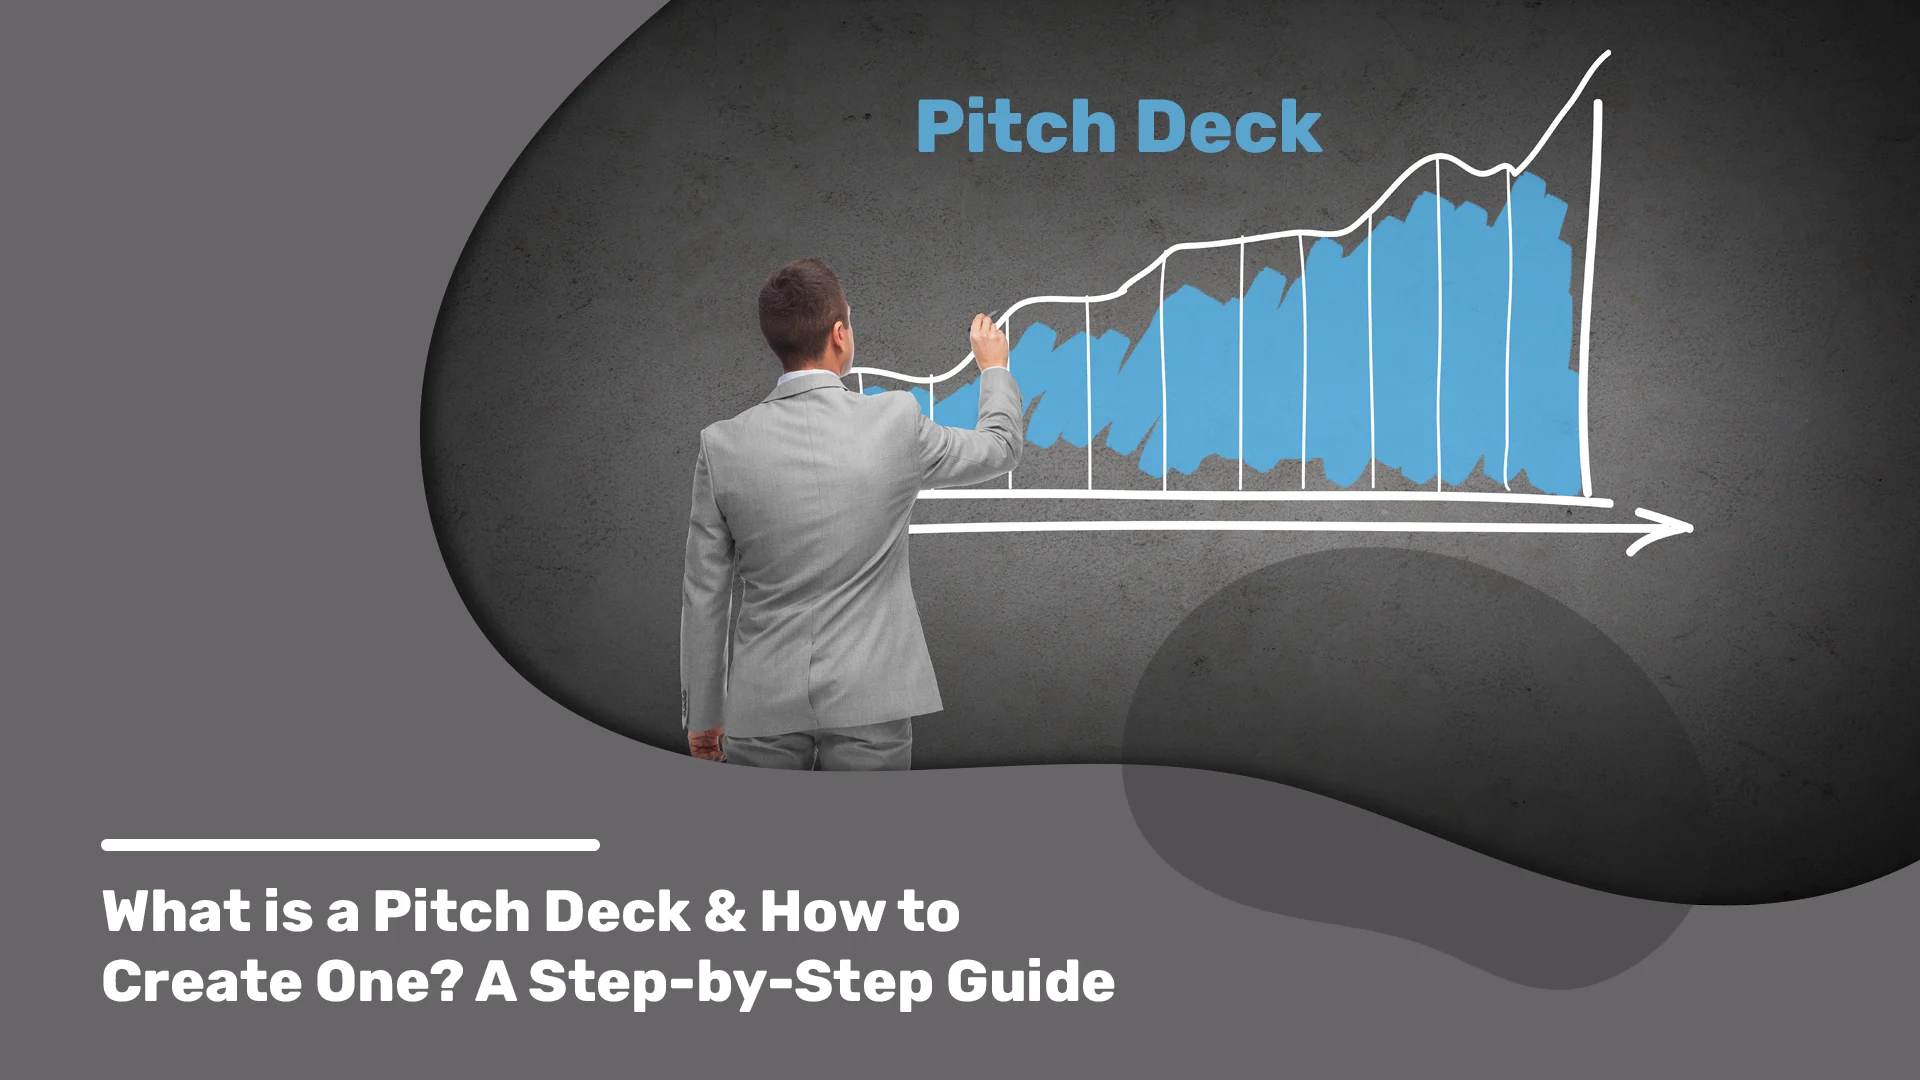 A pitch deck design service provider teach what and how to create a pitch deck